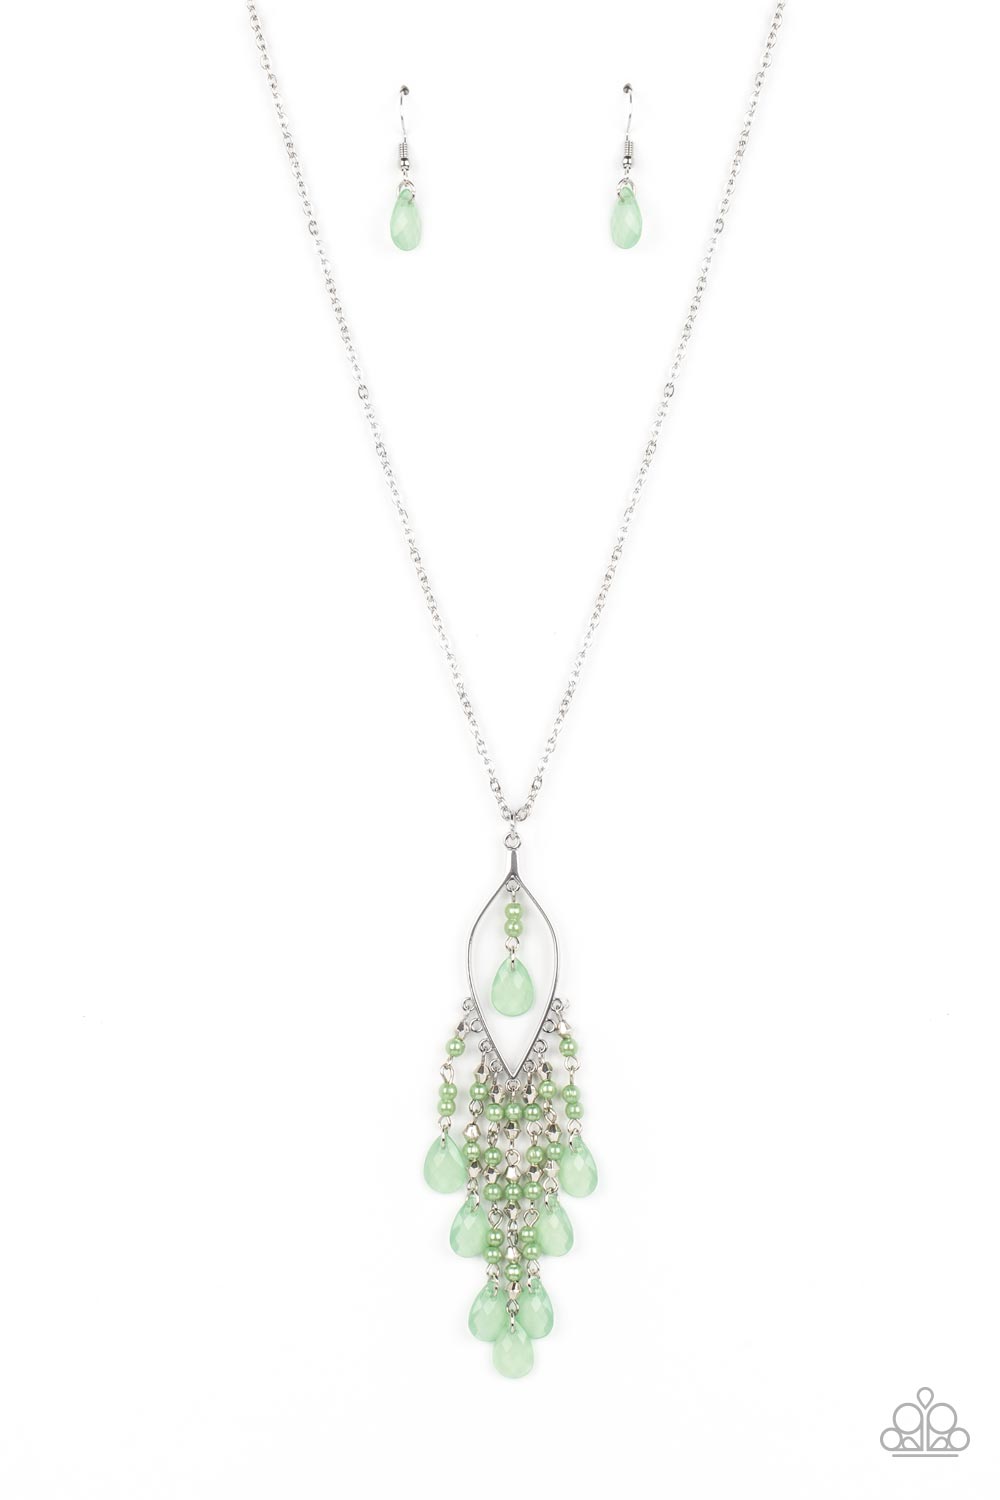 Sweet DREAMCATCHER - Green Beads and Pearls Pendant Silver Long Necklace